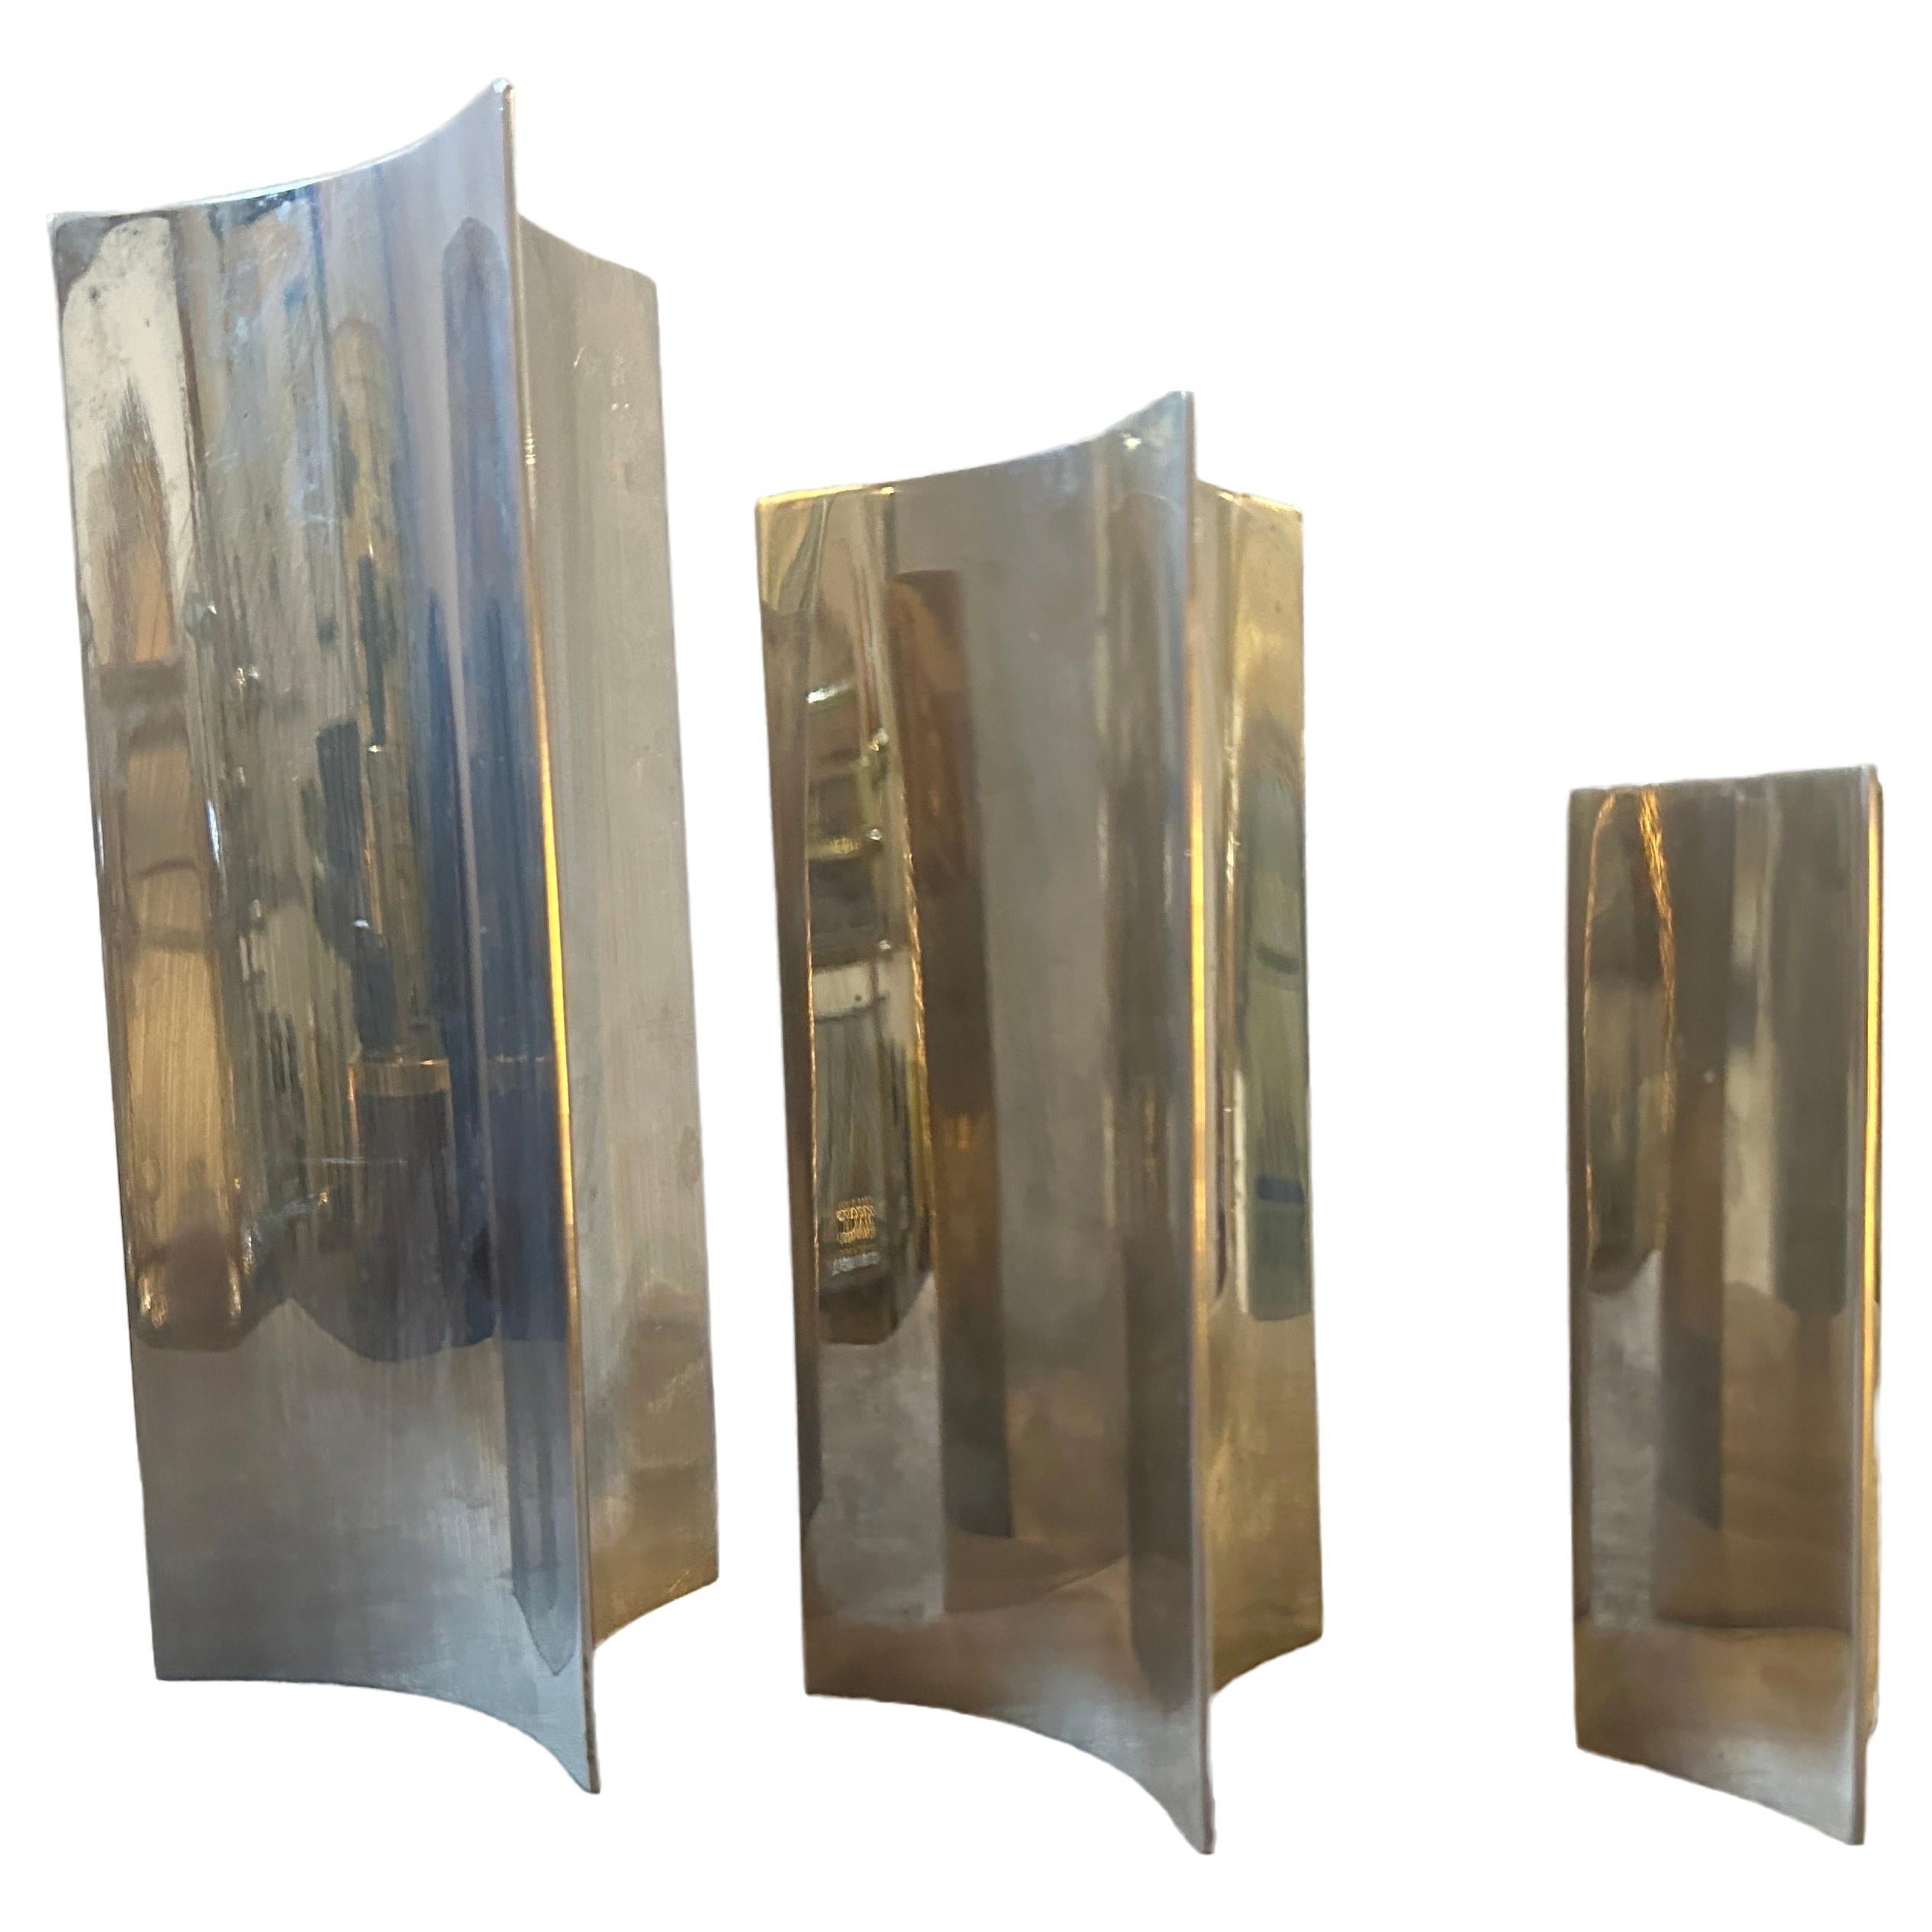 Three triangular steel vases designed and manufactured in Italy in the Eighties, they are in good conditions, height of the medium vase is 20 cm, the height of the small one is 15 cm. They are a striking examples of contemporary design. Their